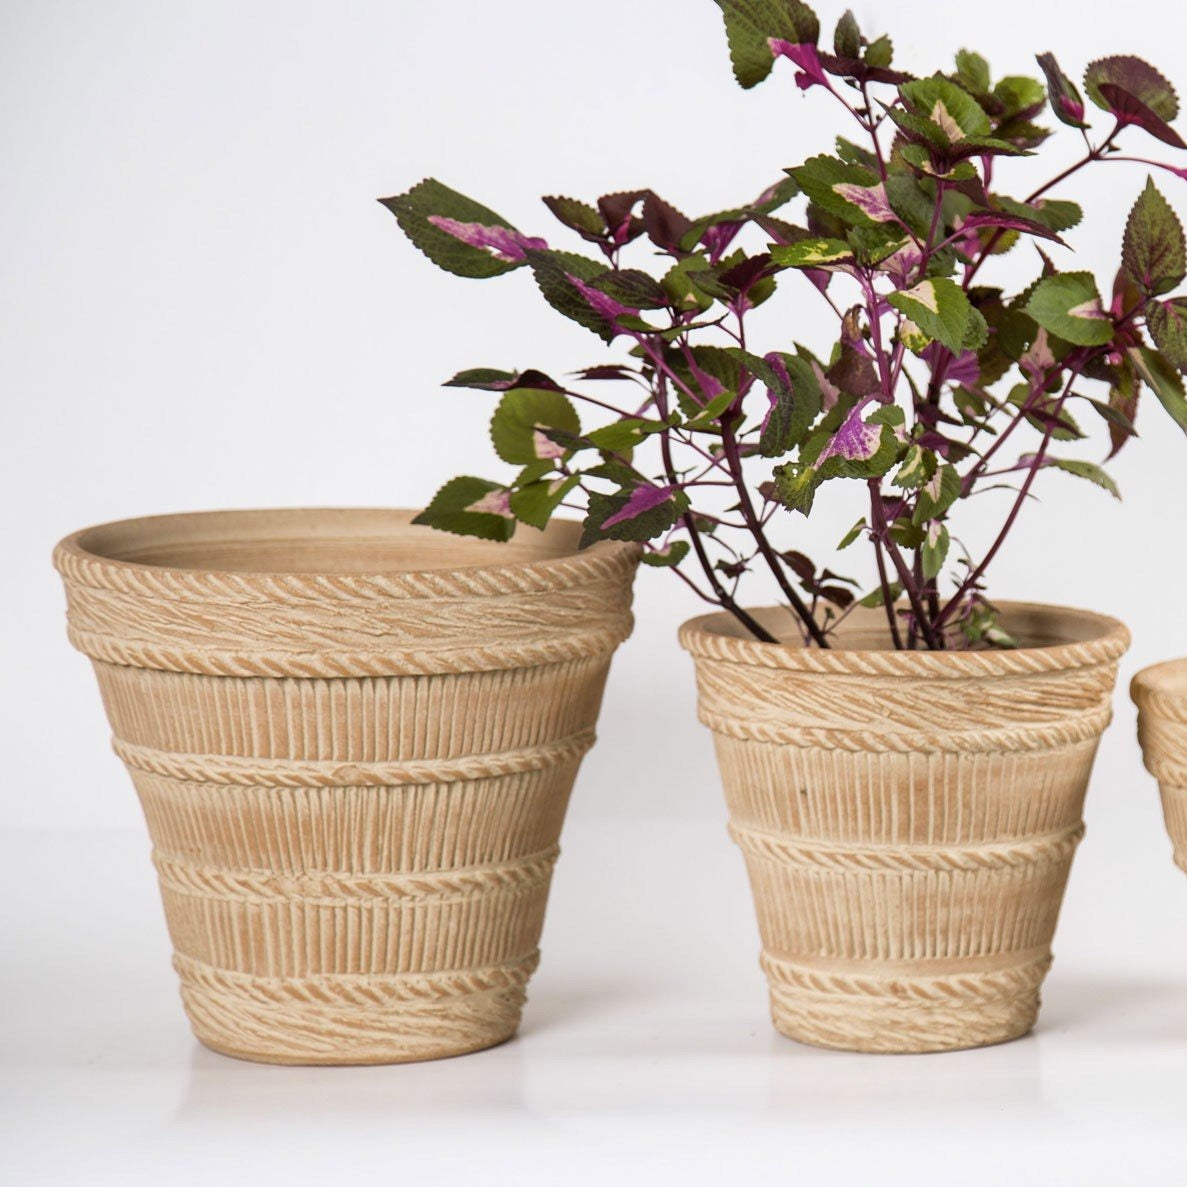 A photo of two French Harvest pots. One large and one medium in natural clay color.